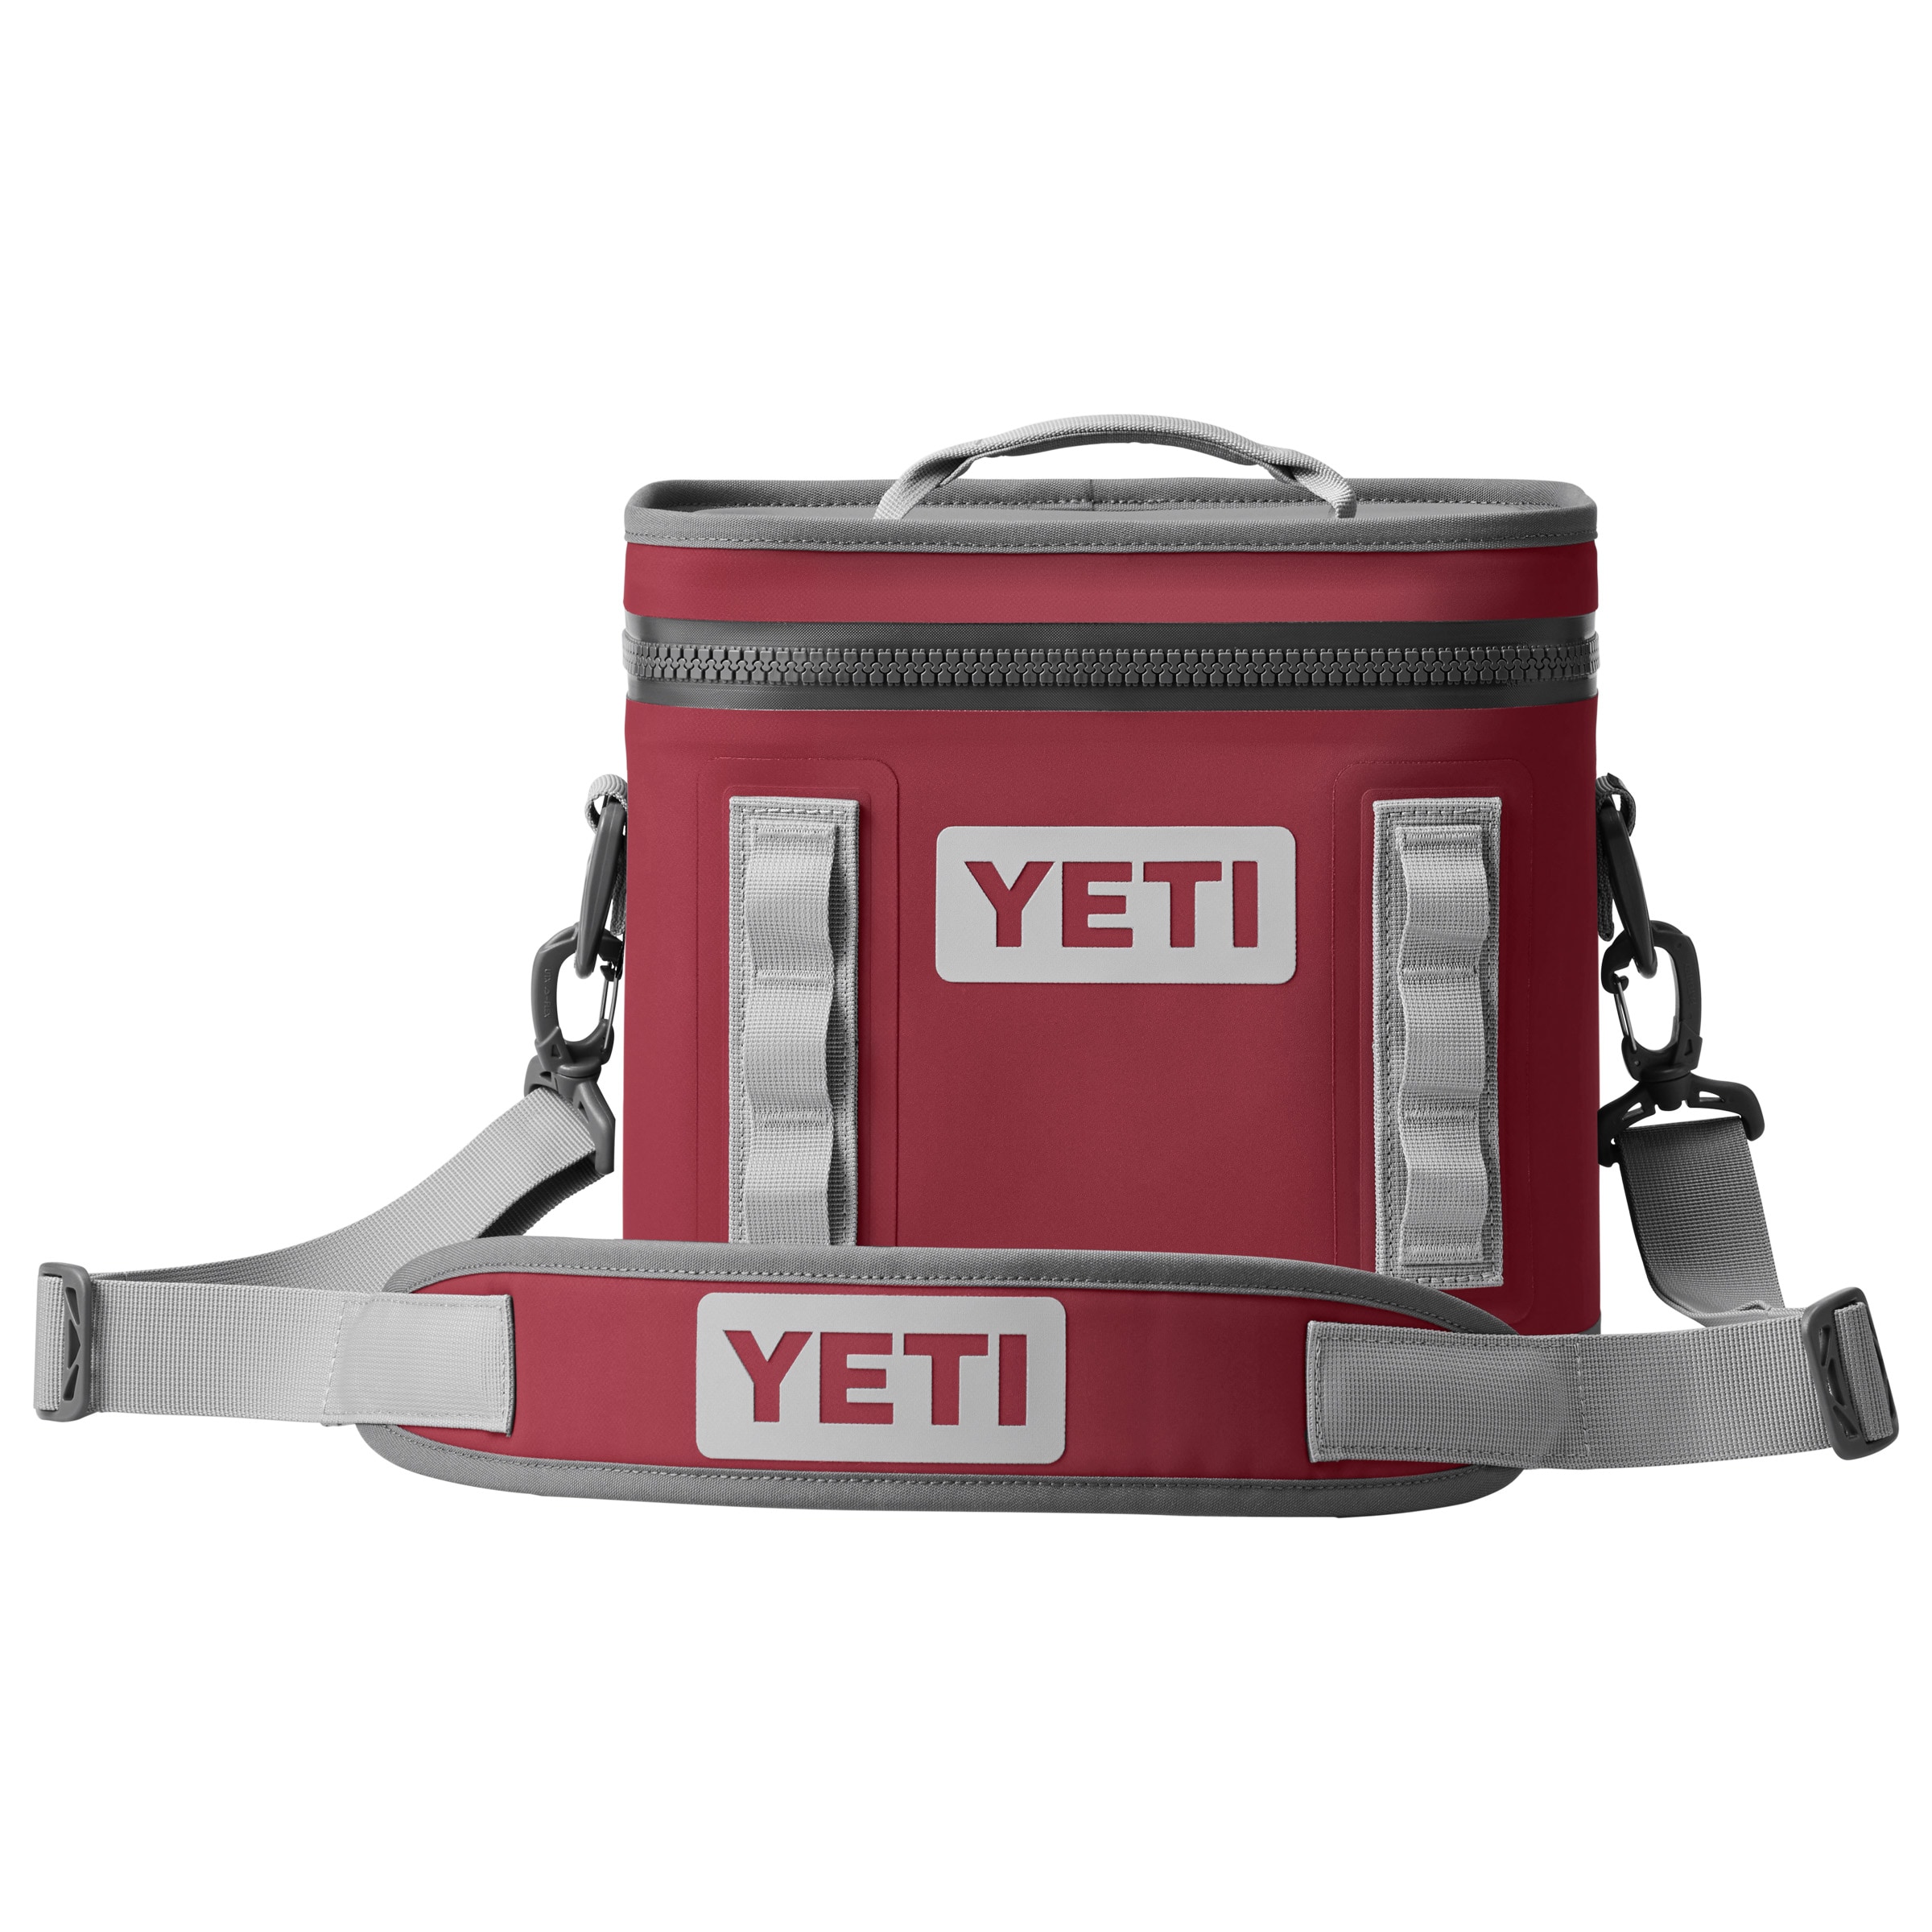 YETI Hopper Flip 12 Insulated Personal Cooler, Coral at